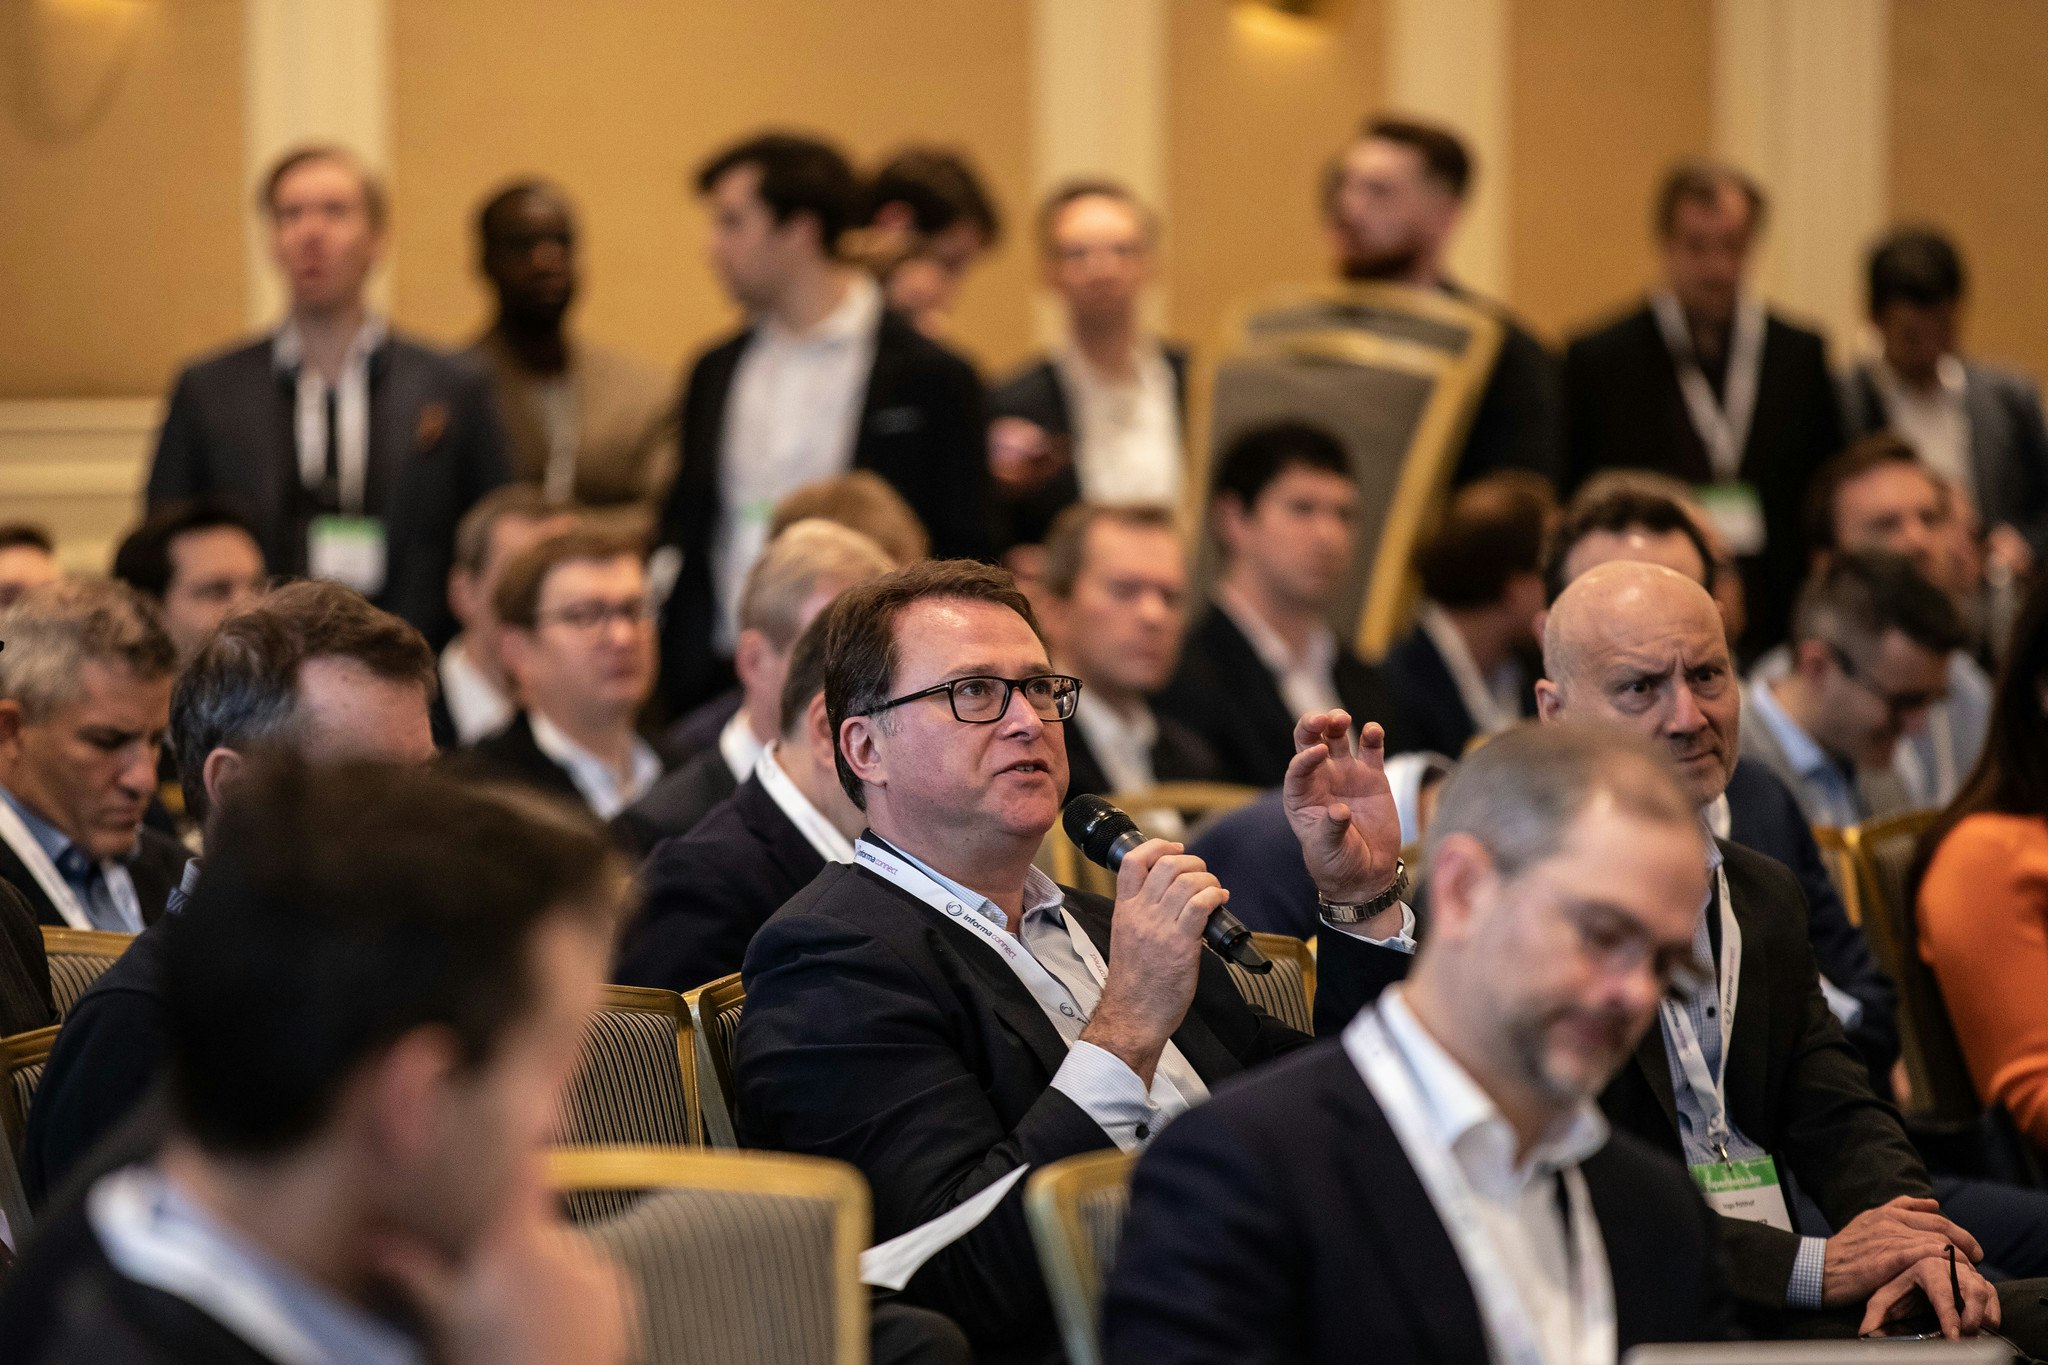 Photo of Attendees at Berlin conference SuperVenture 2020